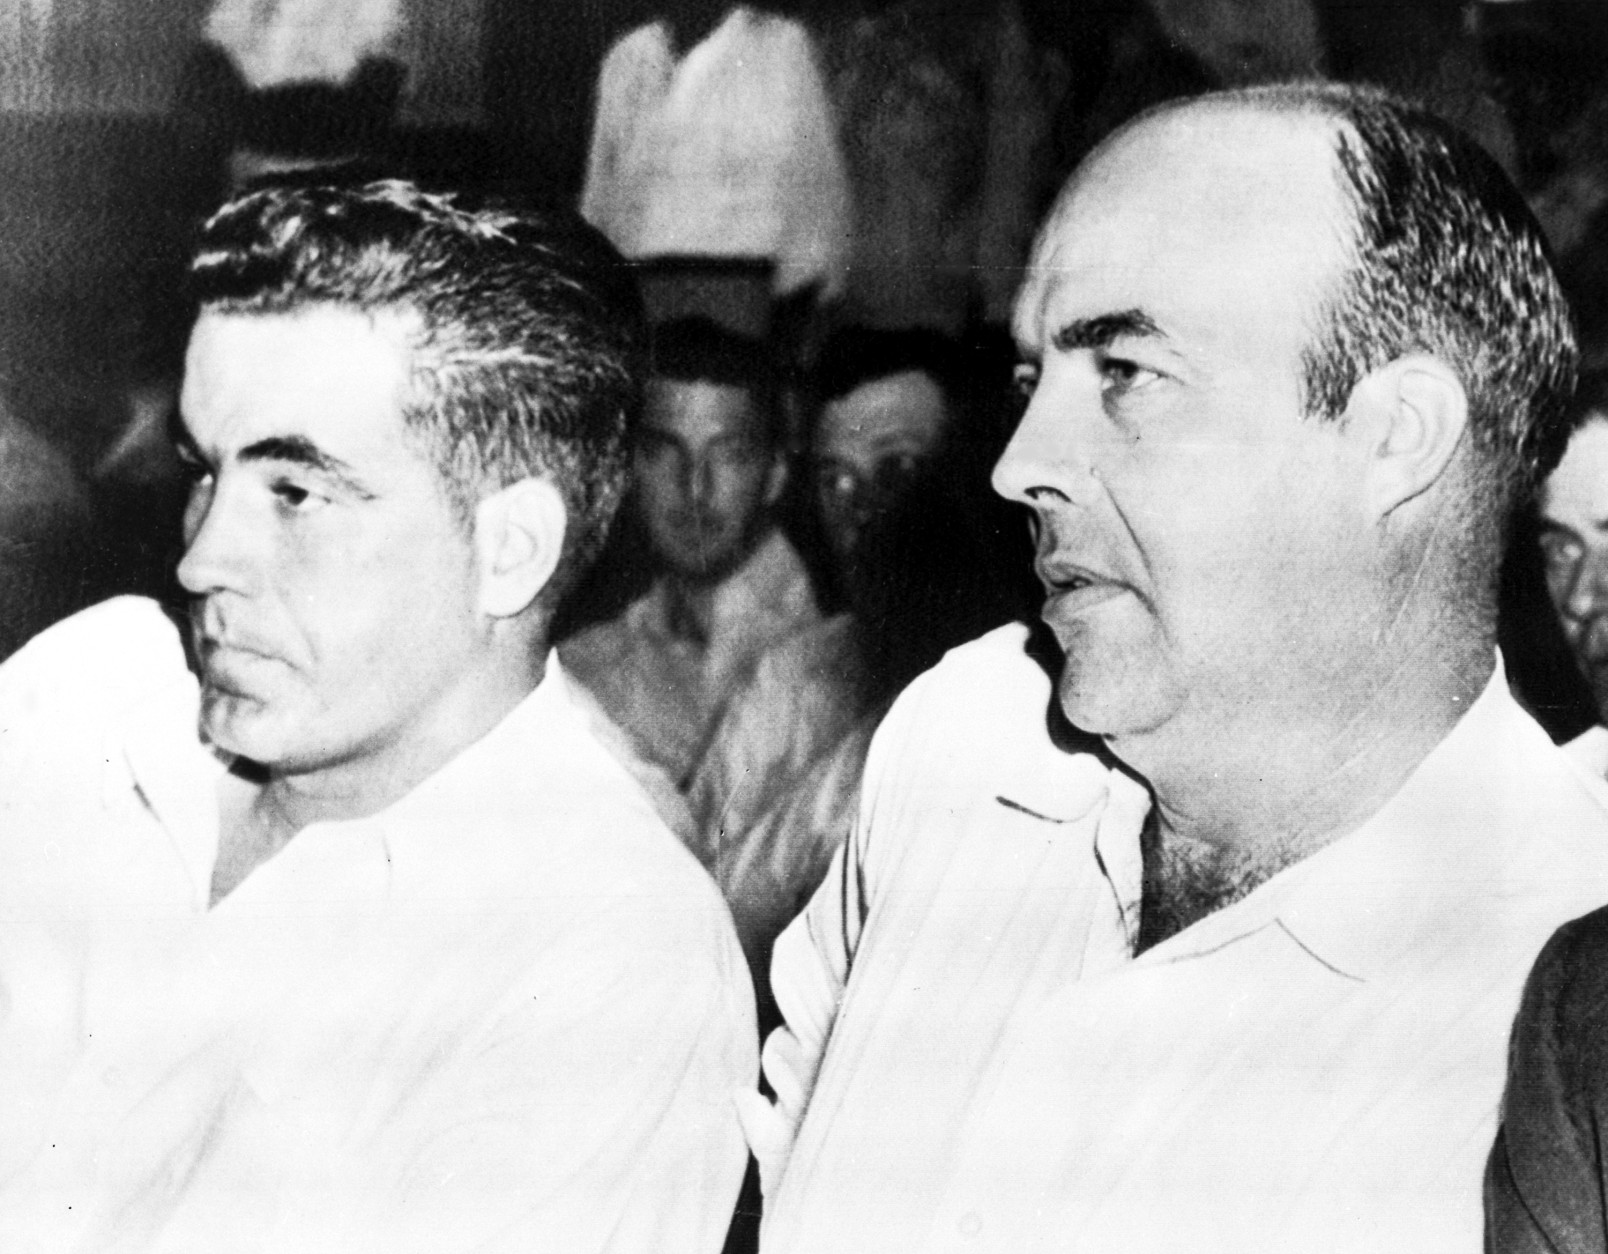 In 1955, a jury in Sumner, Mississippi, acquitted two white men, Roy Bryant and J.W. Milam, of murdering black teenager Emmett Till. The two men later admitted to the crime in an interview with Look magazine. Bryant and Milam are seen here inside the courtroom. (AP Photo)